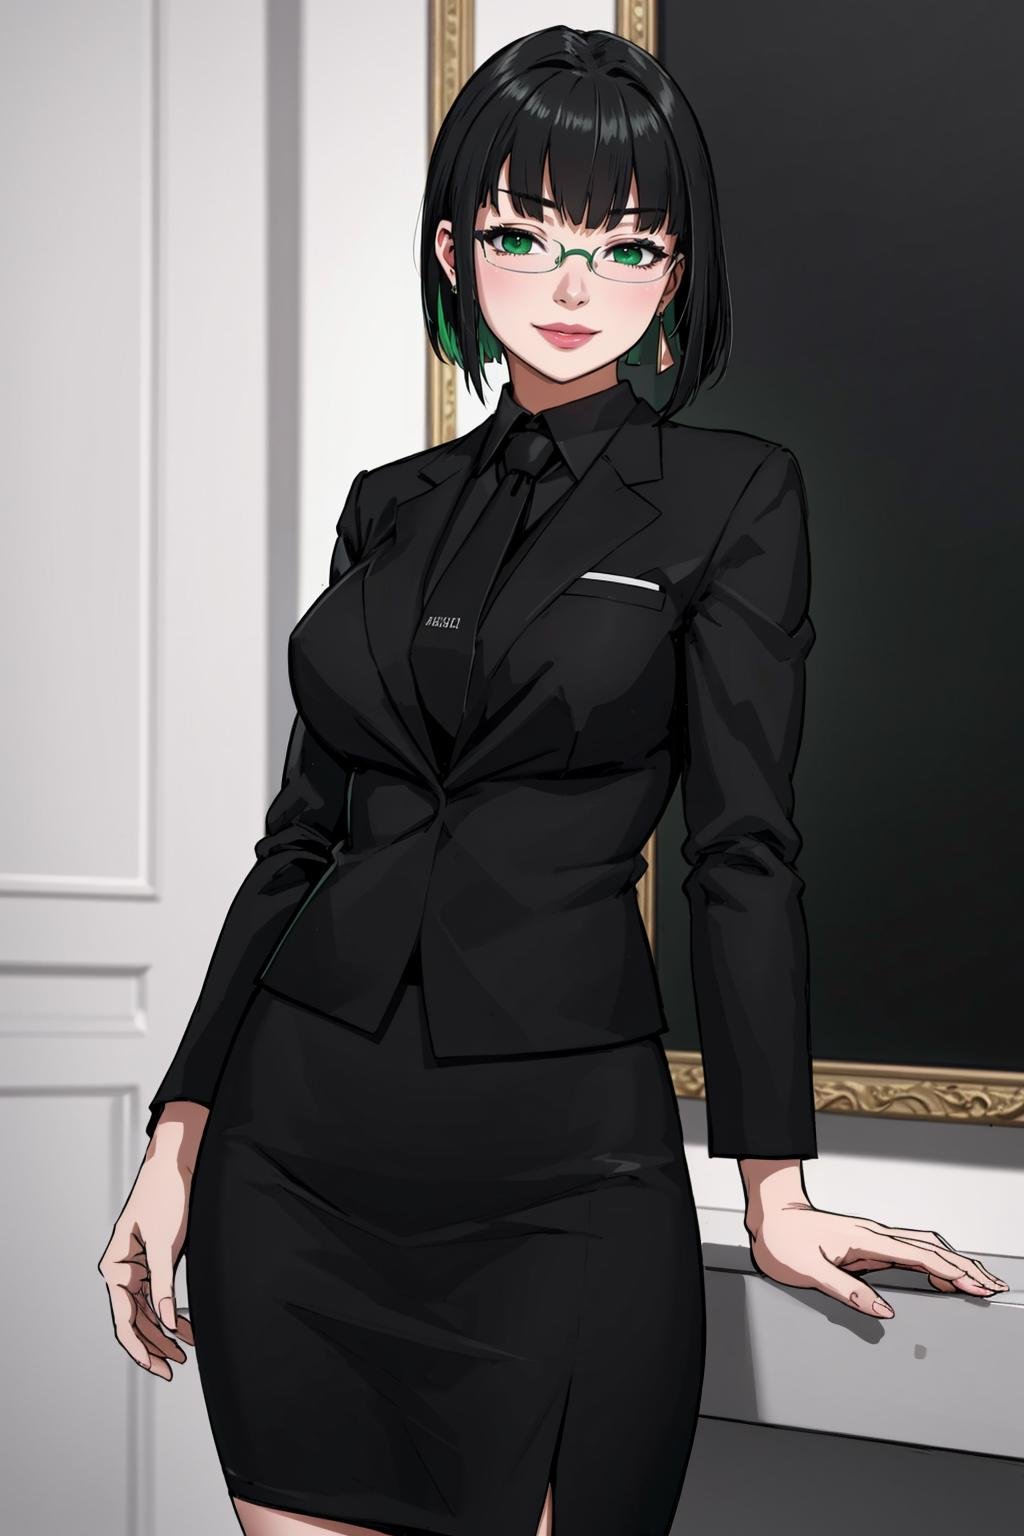 ((Masterpiece, best quality,edgQuality))smiling,solo,1girl,posing for a picture,edgAllmind,blunt bangs,two tone hair,earrings,black suit,necktie, green eyes,pencil skirt,glasses<lora:edgArmoredCore6Allmind:0.8>